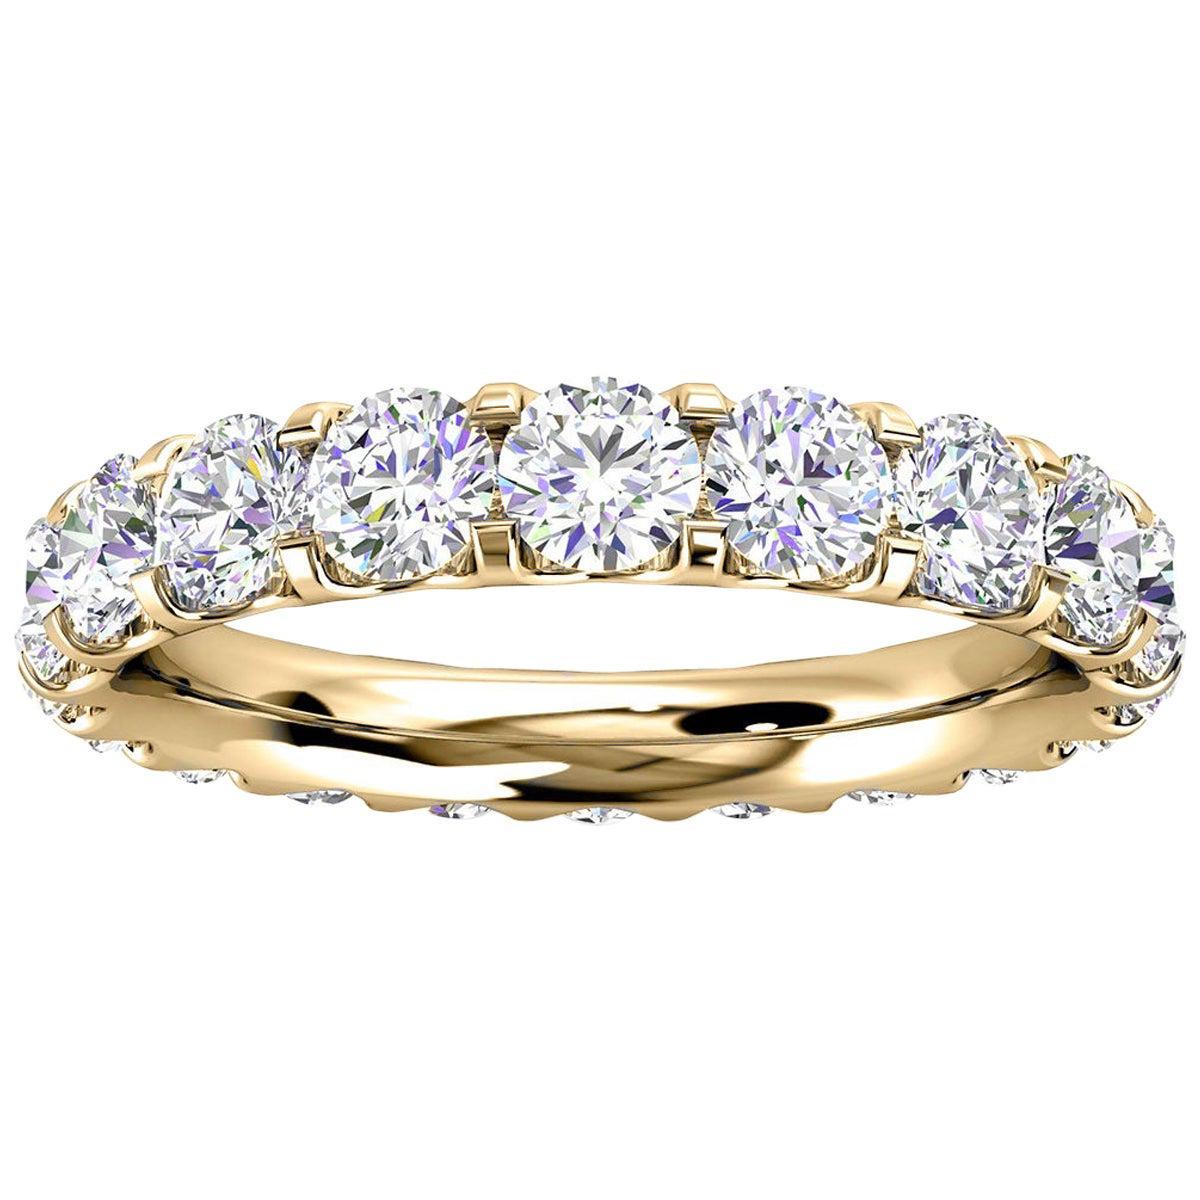 For Sale:  14k Yellow Gold Viola Eternity Micro-Prong Diamond Ring '2 Ct. Tw'